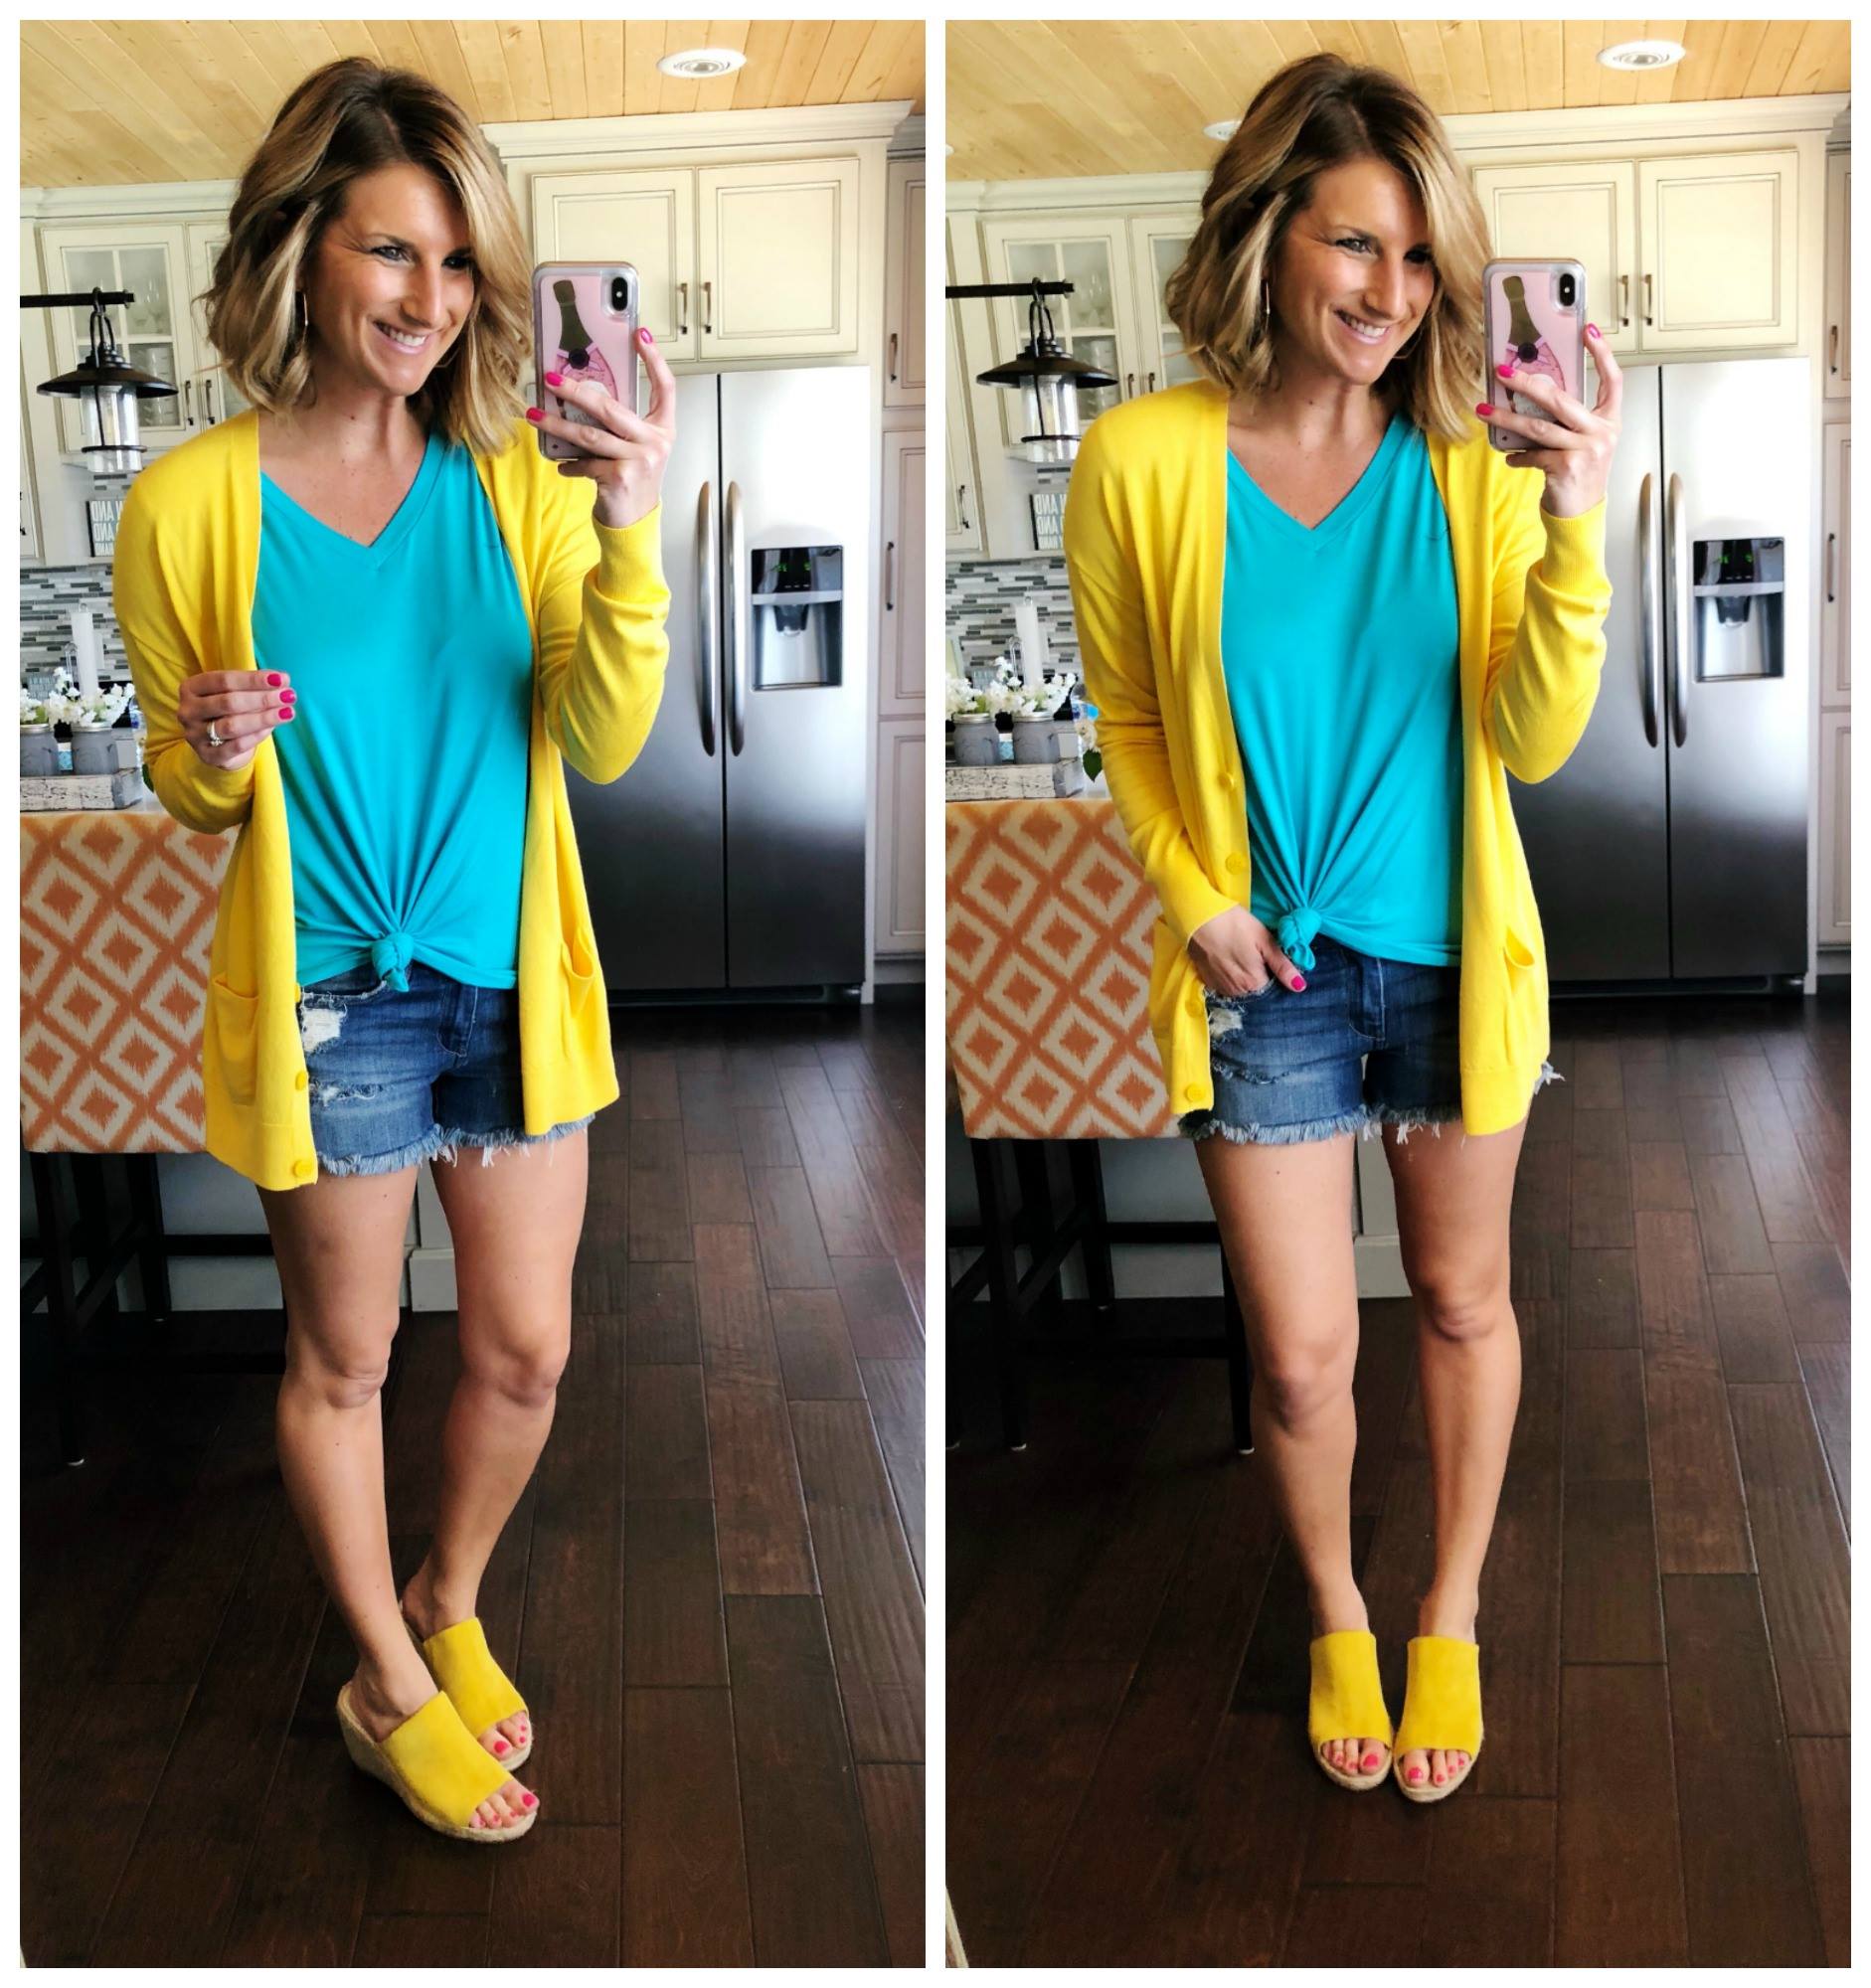 Casual Summer Outfit // How to Wear Bright Color Clothes // Perfect V Neck Top + Cut Off Shorts + Cardigan + Wedge Sandals